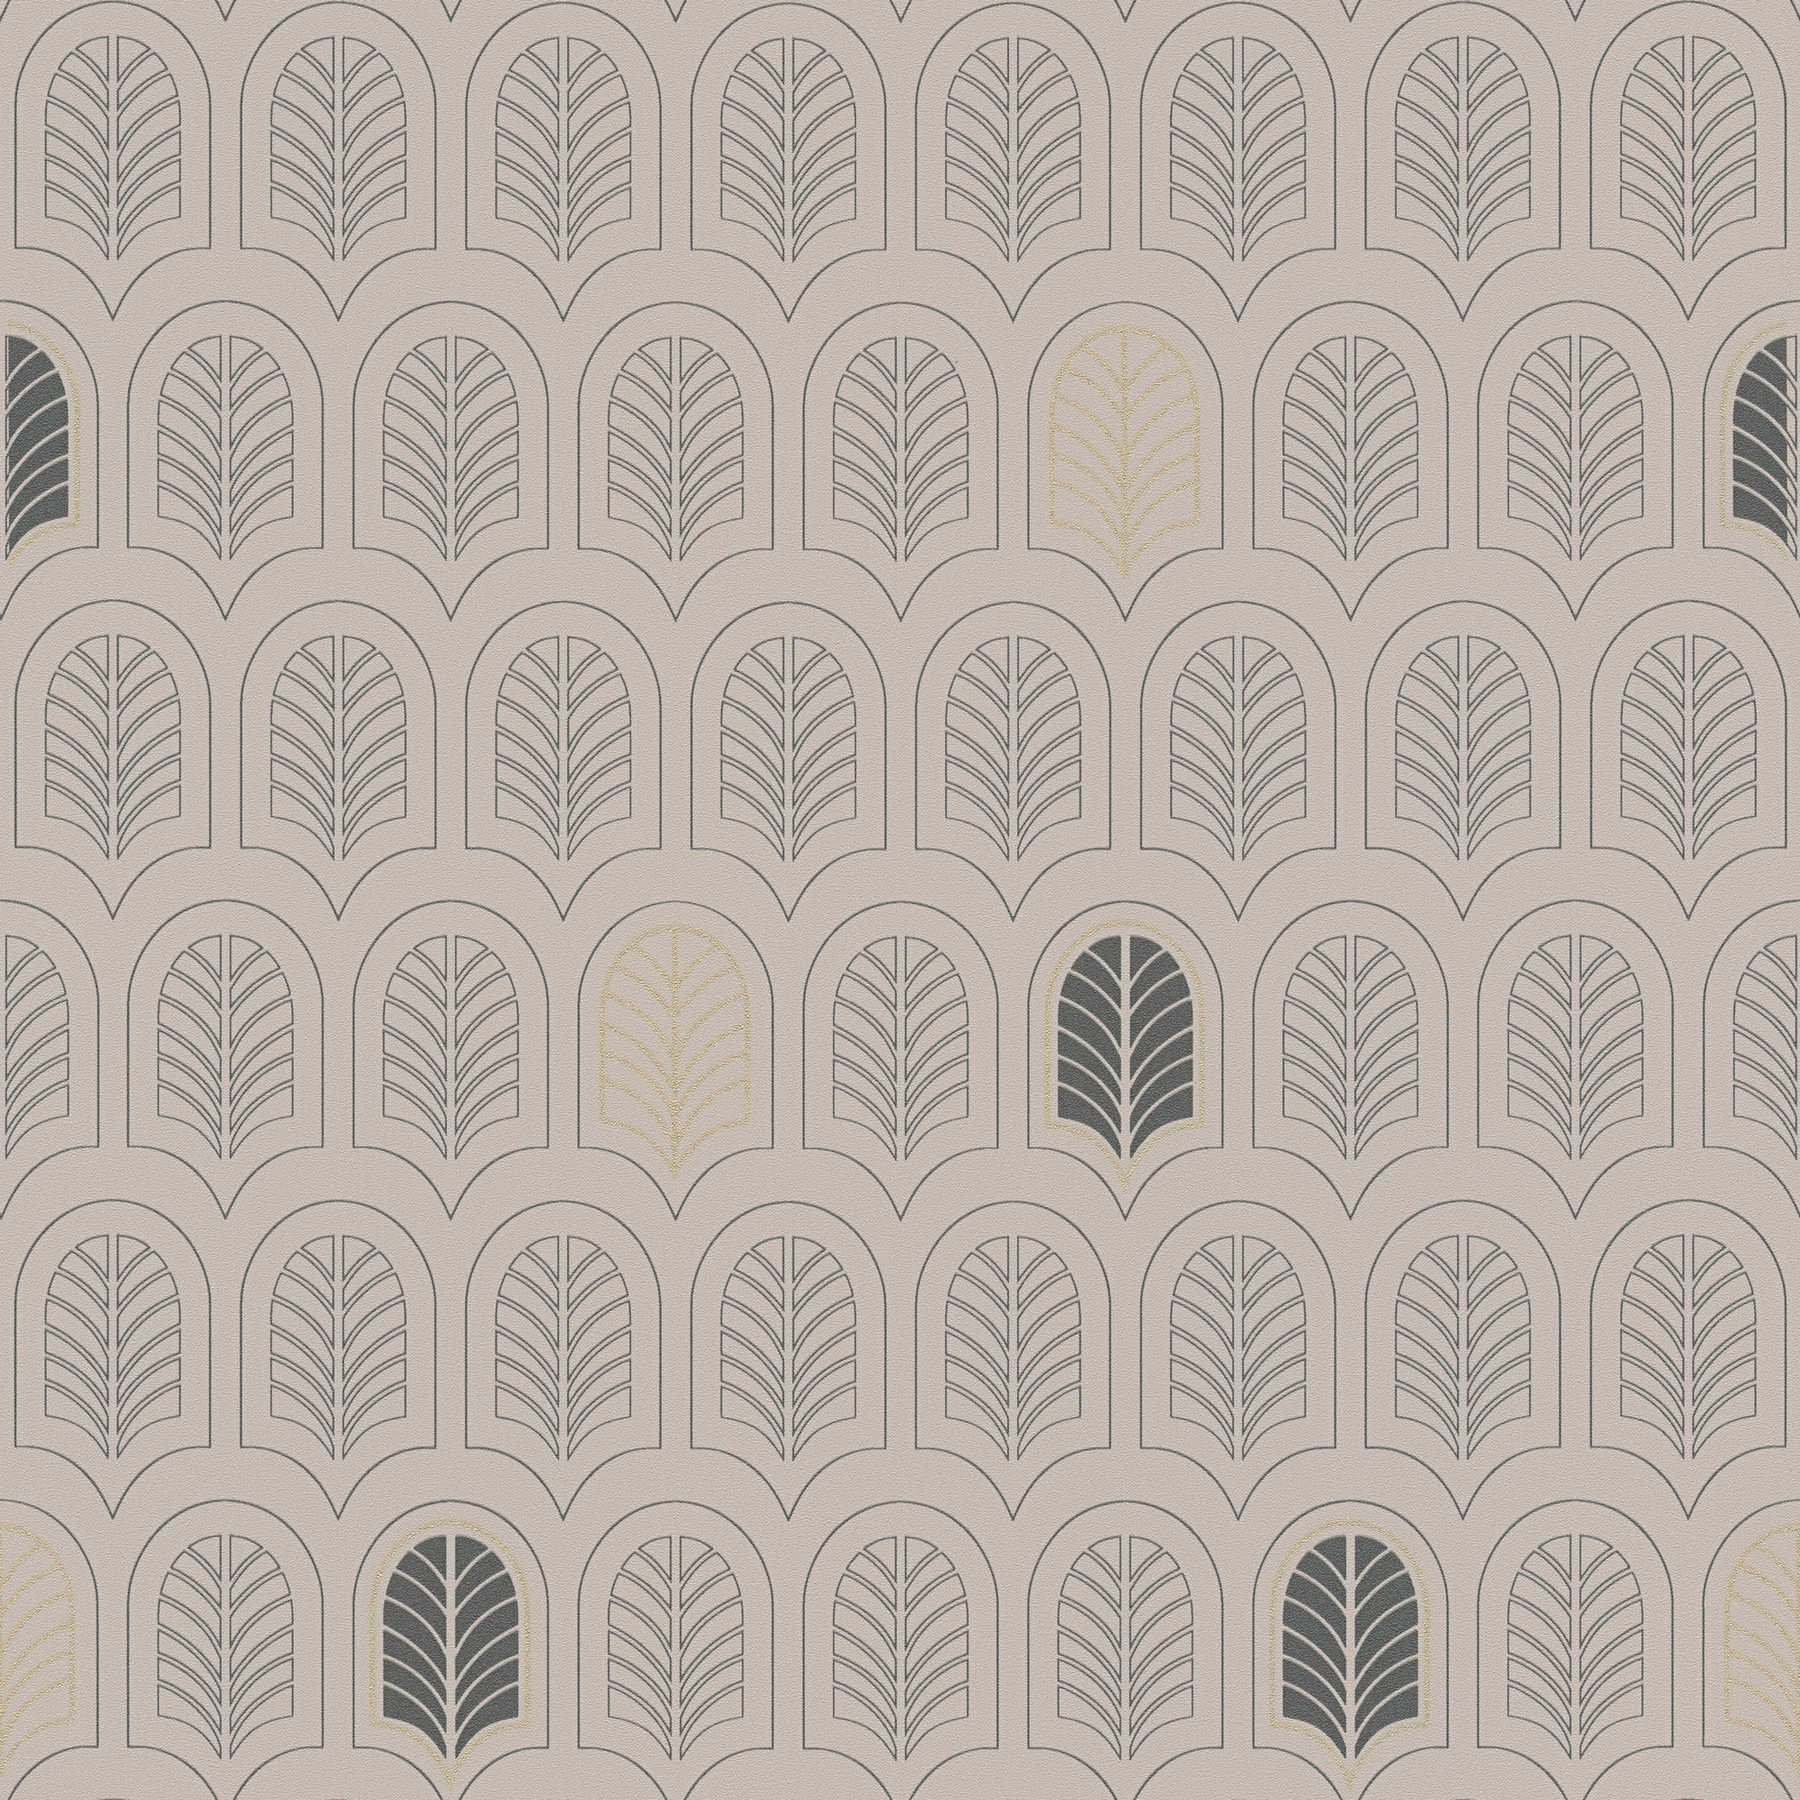 Art Deco wallpaper with metallic & glitter accents - taupe, anthracite, beige
